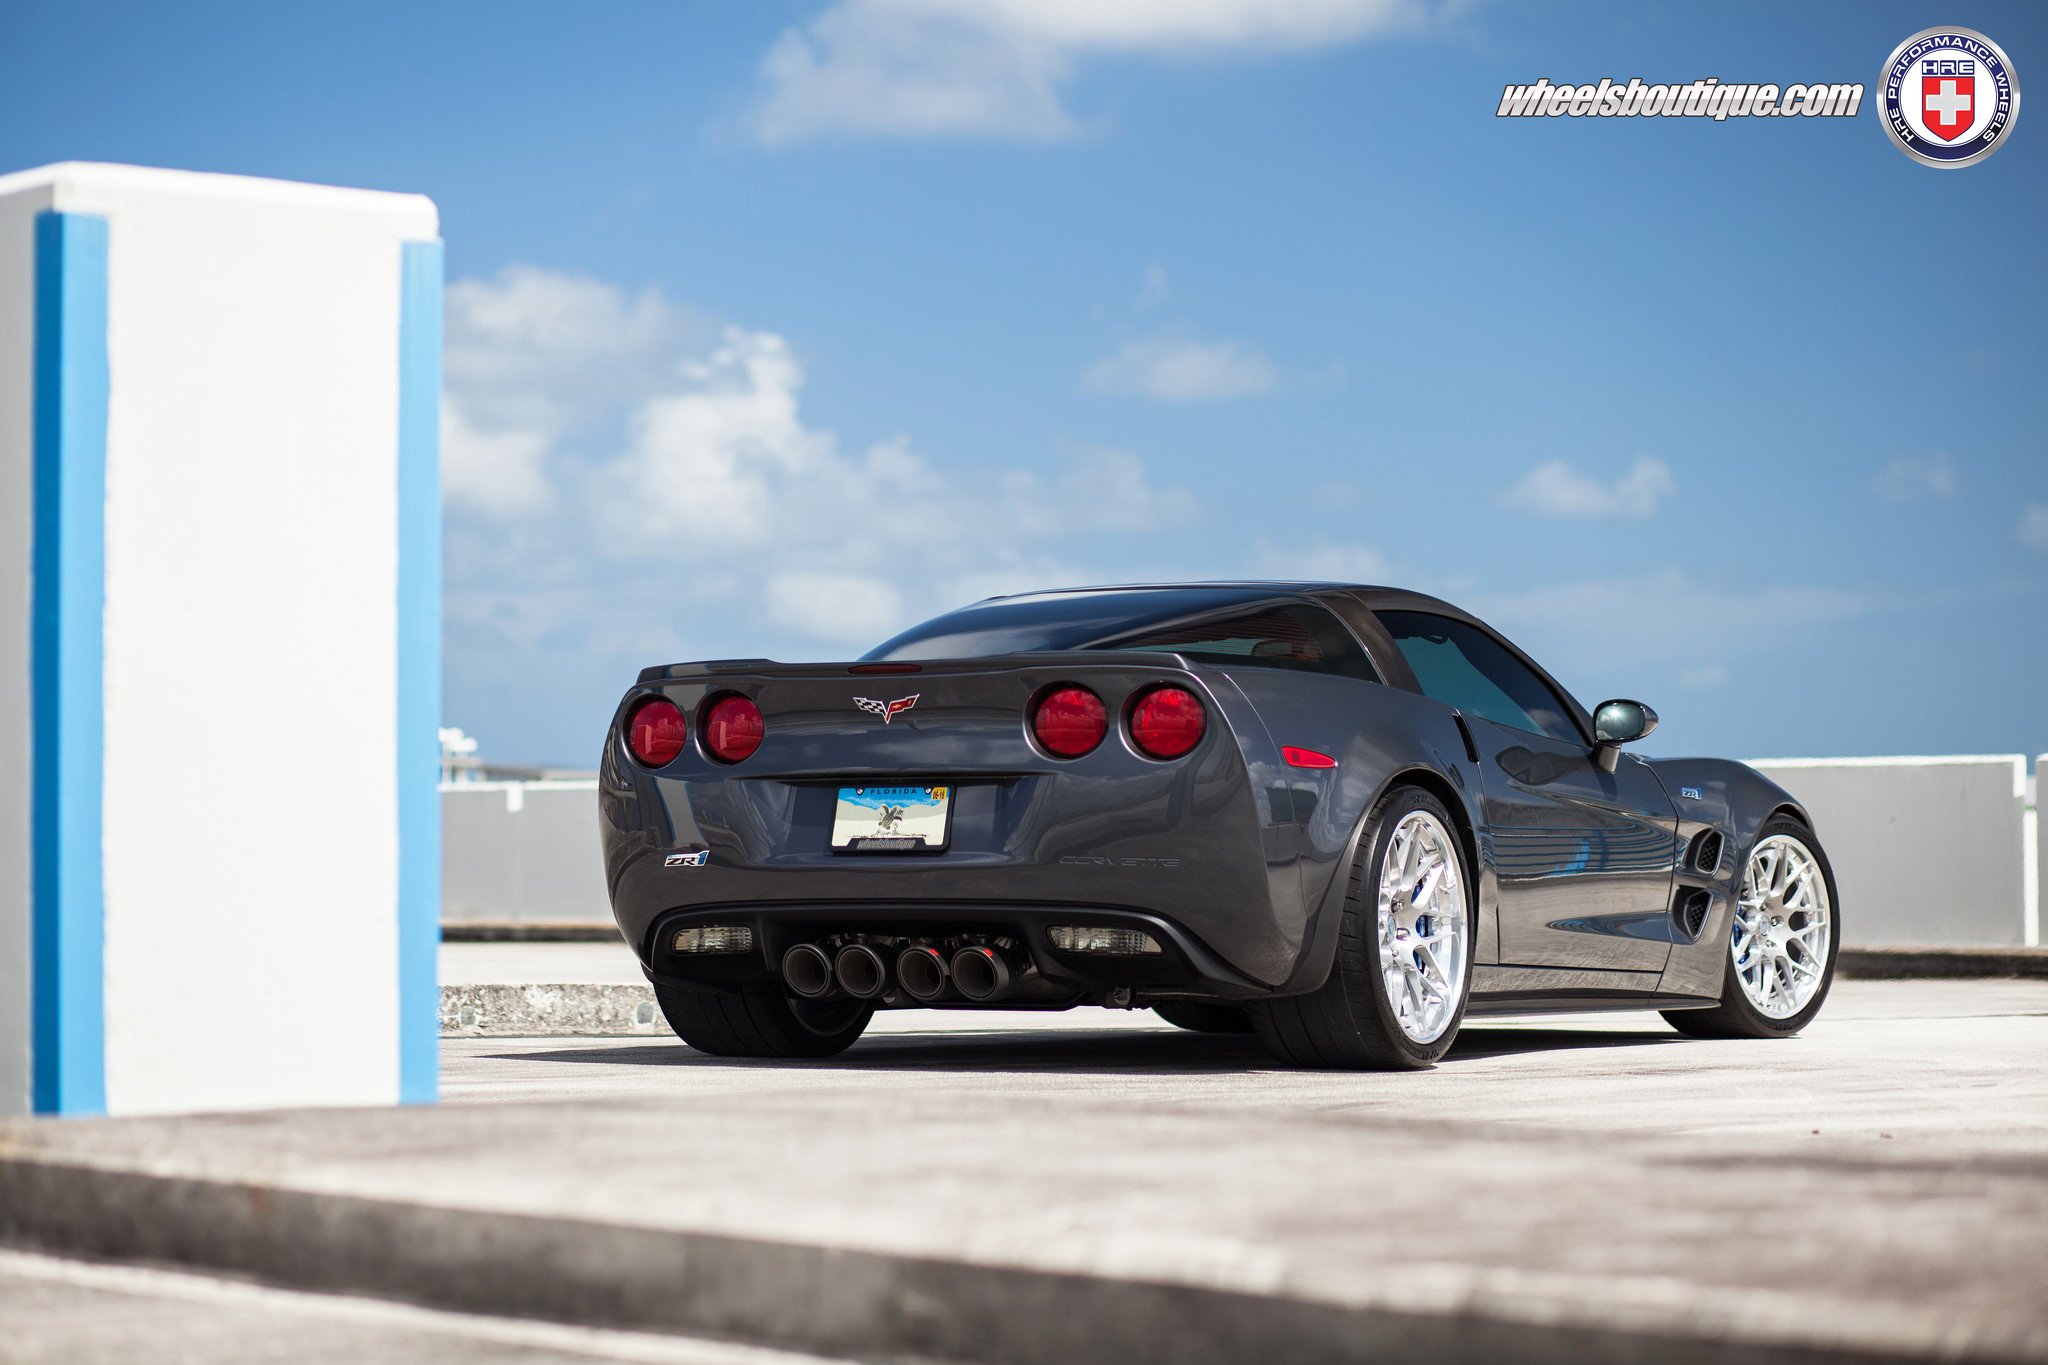 chevy, Corvette, Zr1, C6, Hre, Wheels, Tuning, Coupe, Cars Wallpaper